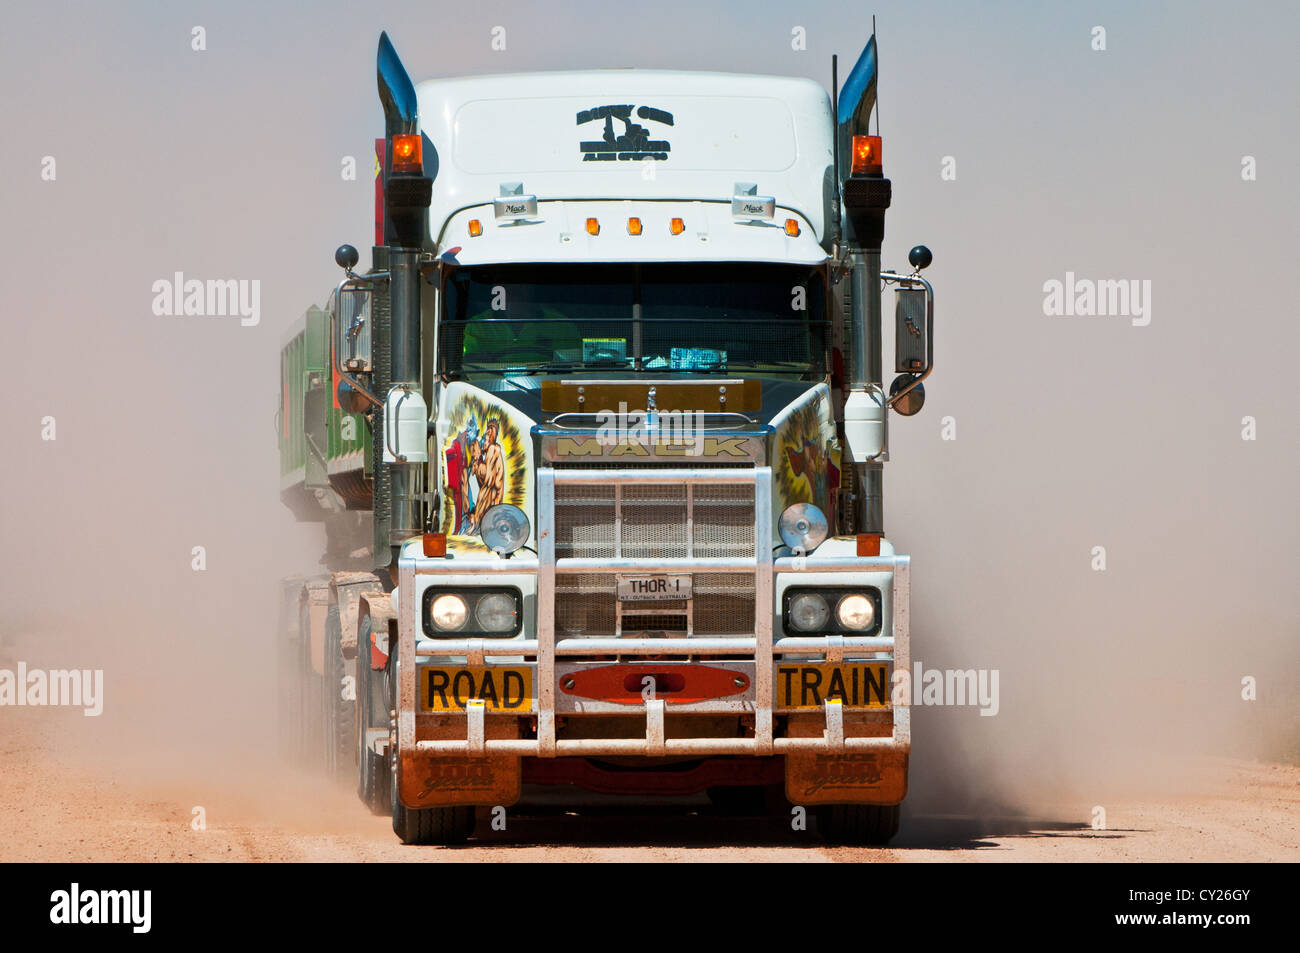 Road Train in a dust cloud on a desert track. Stock Photo